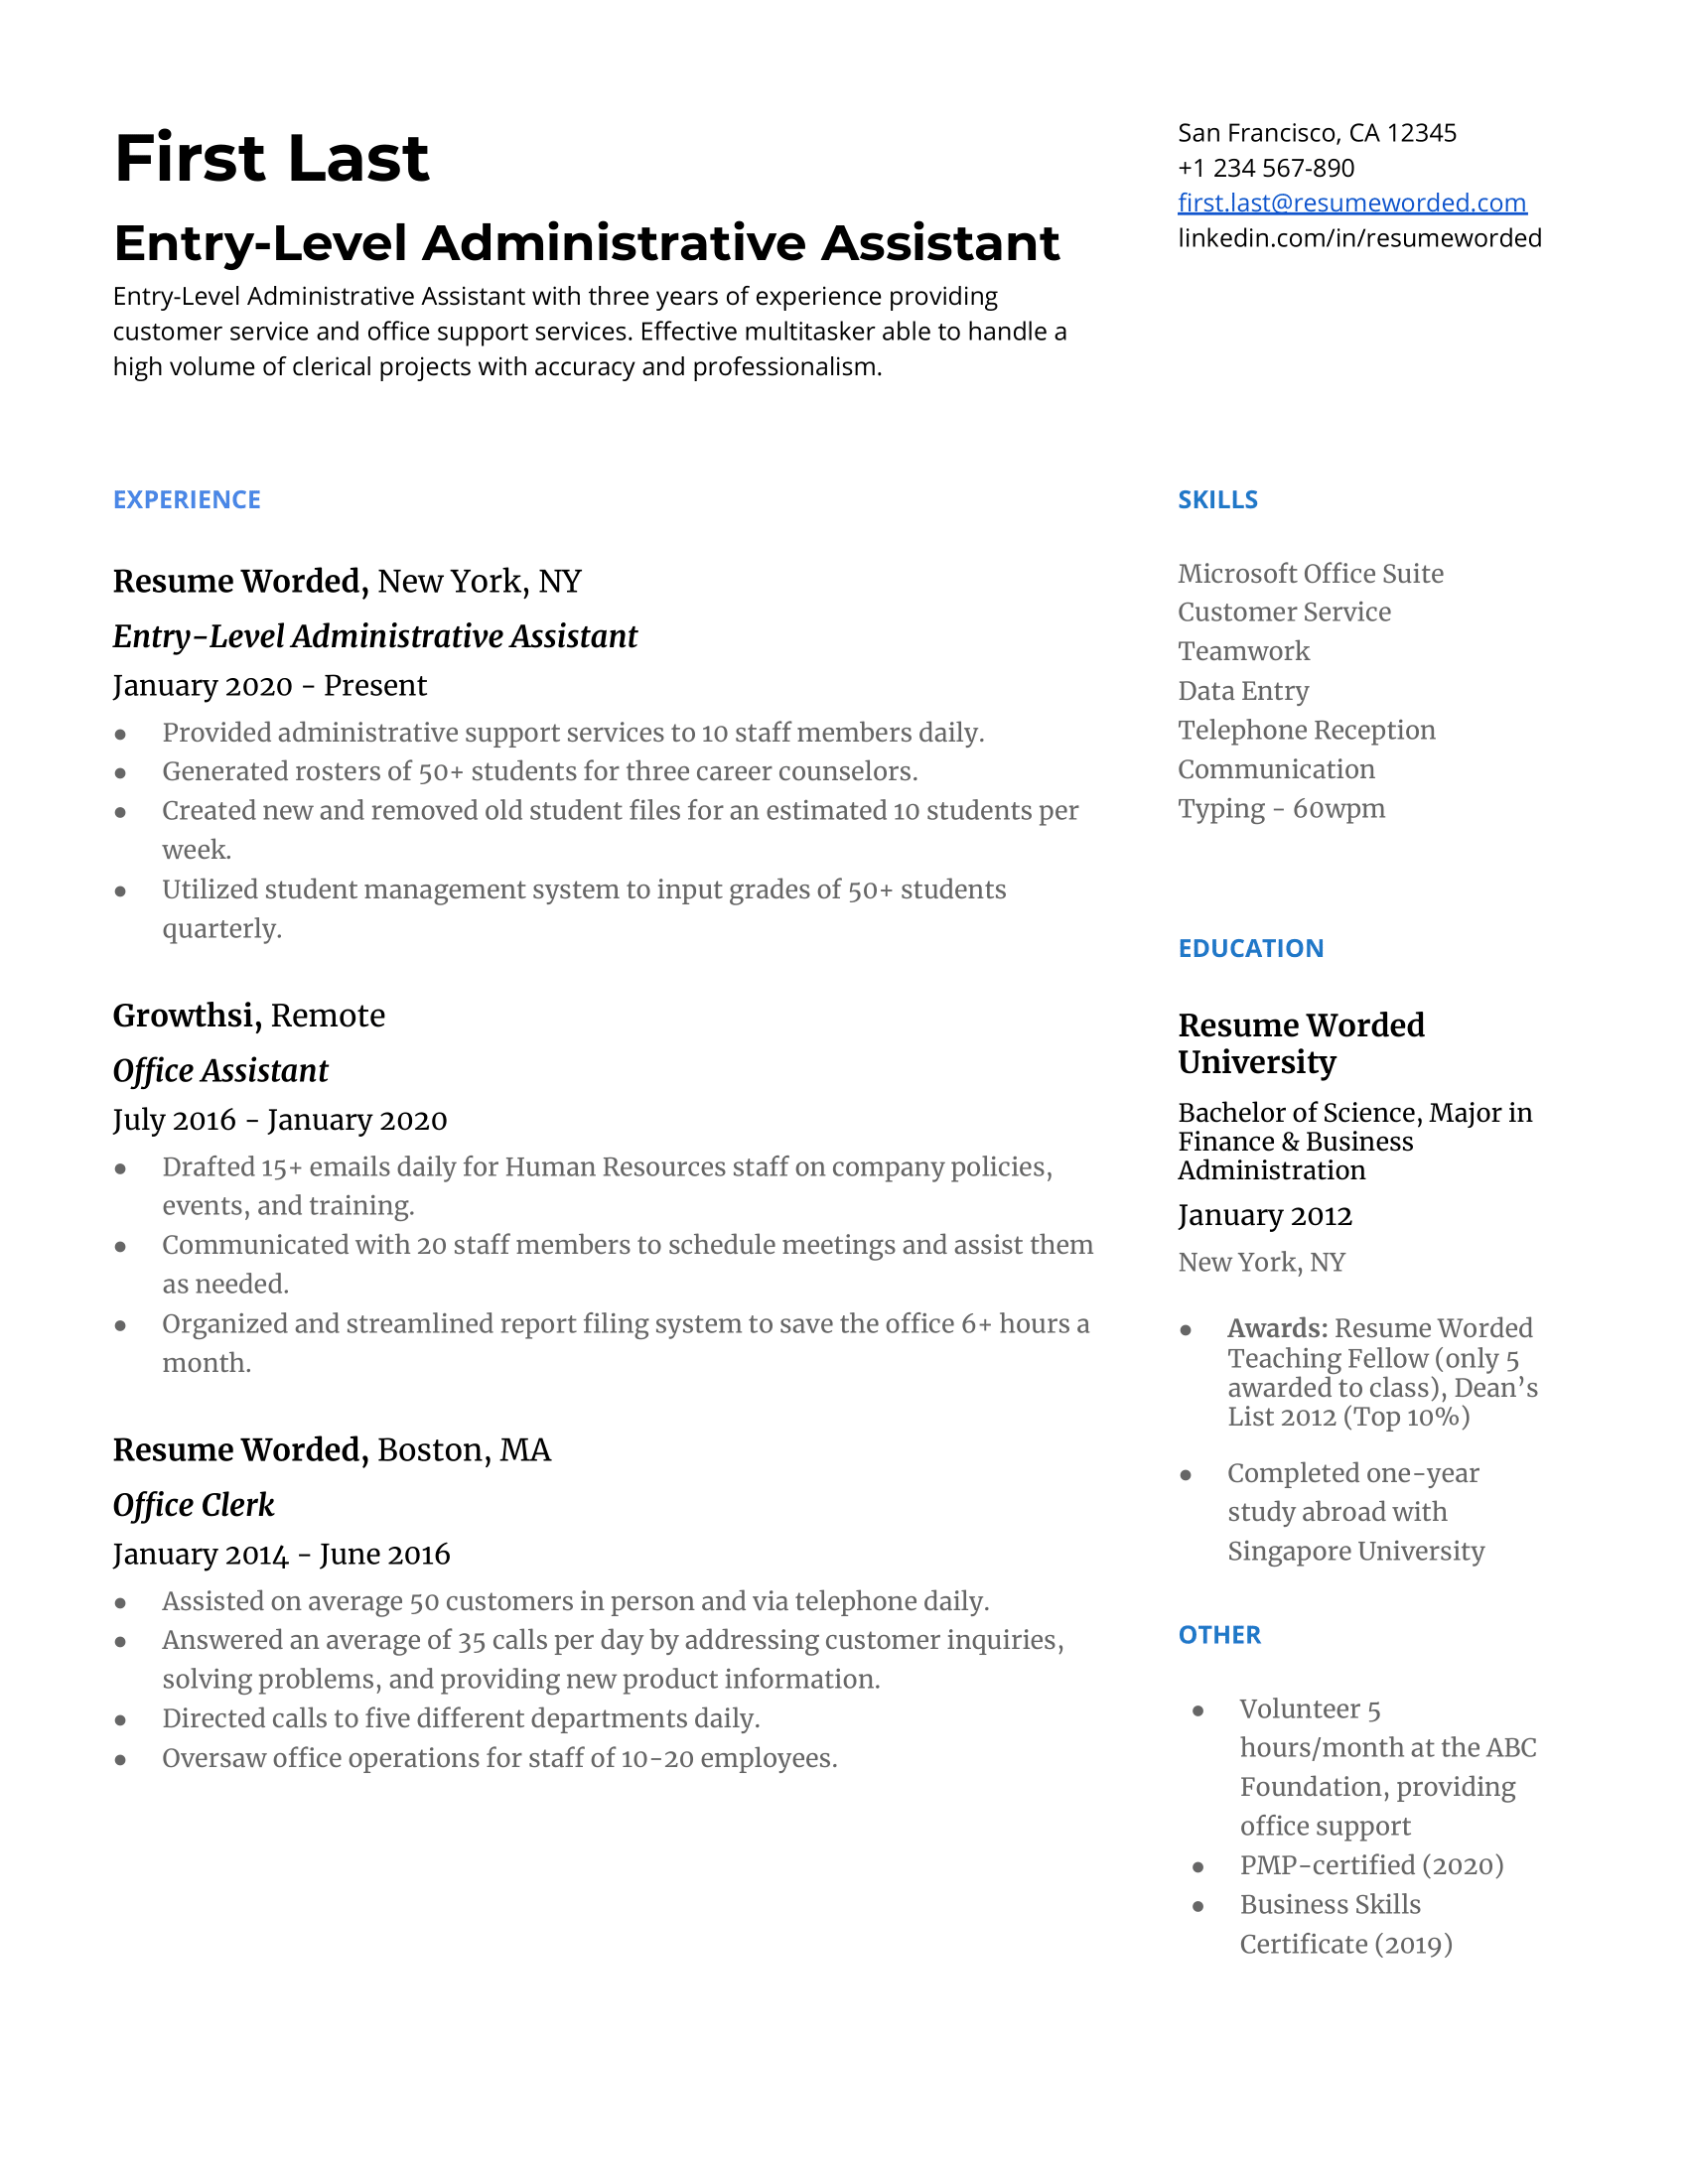 An entry-level administrative assistant resume template with related administrative work from other jobs, relevant skills, and education. 